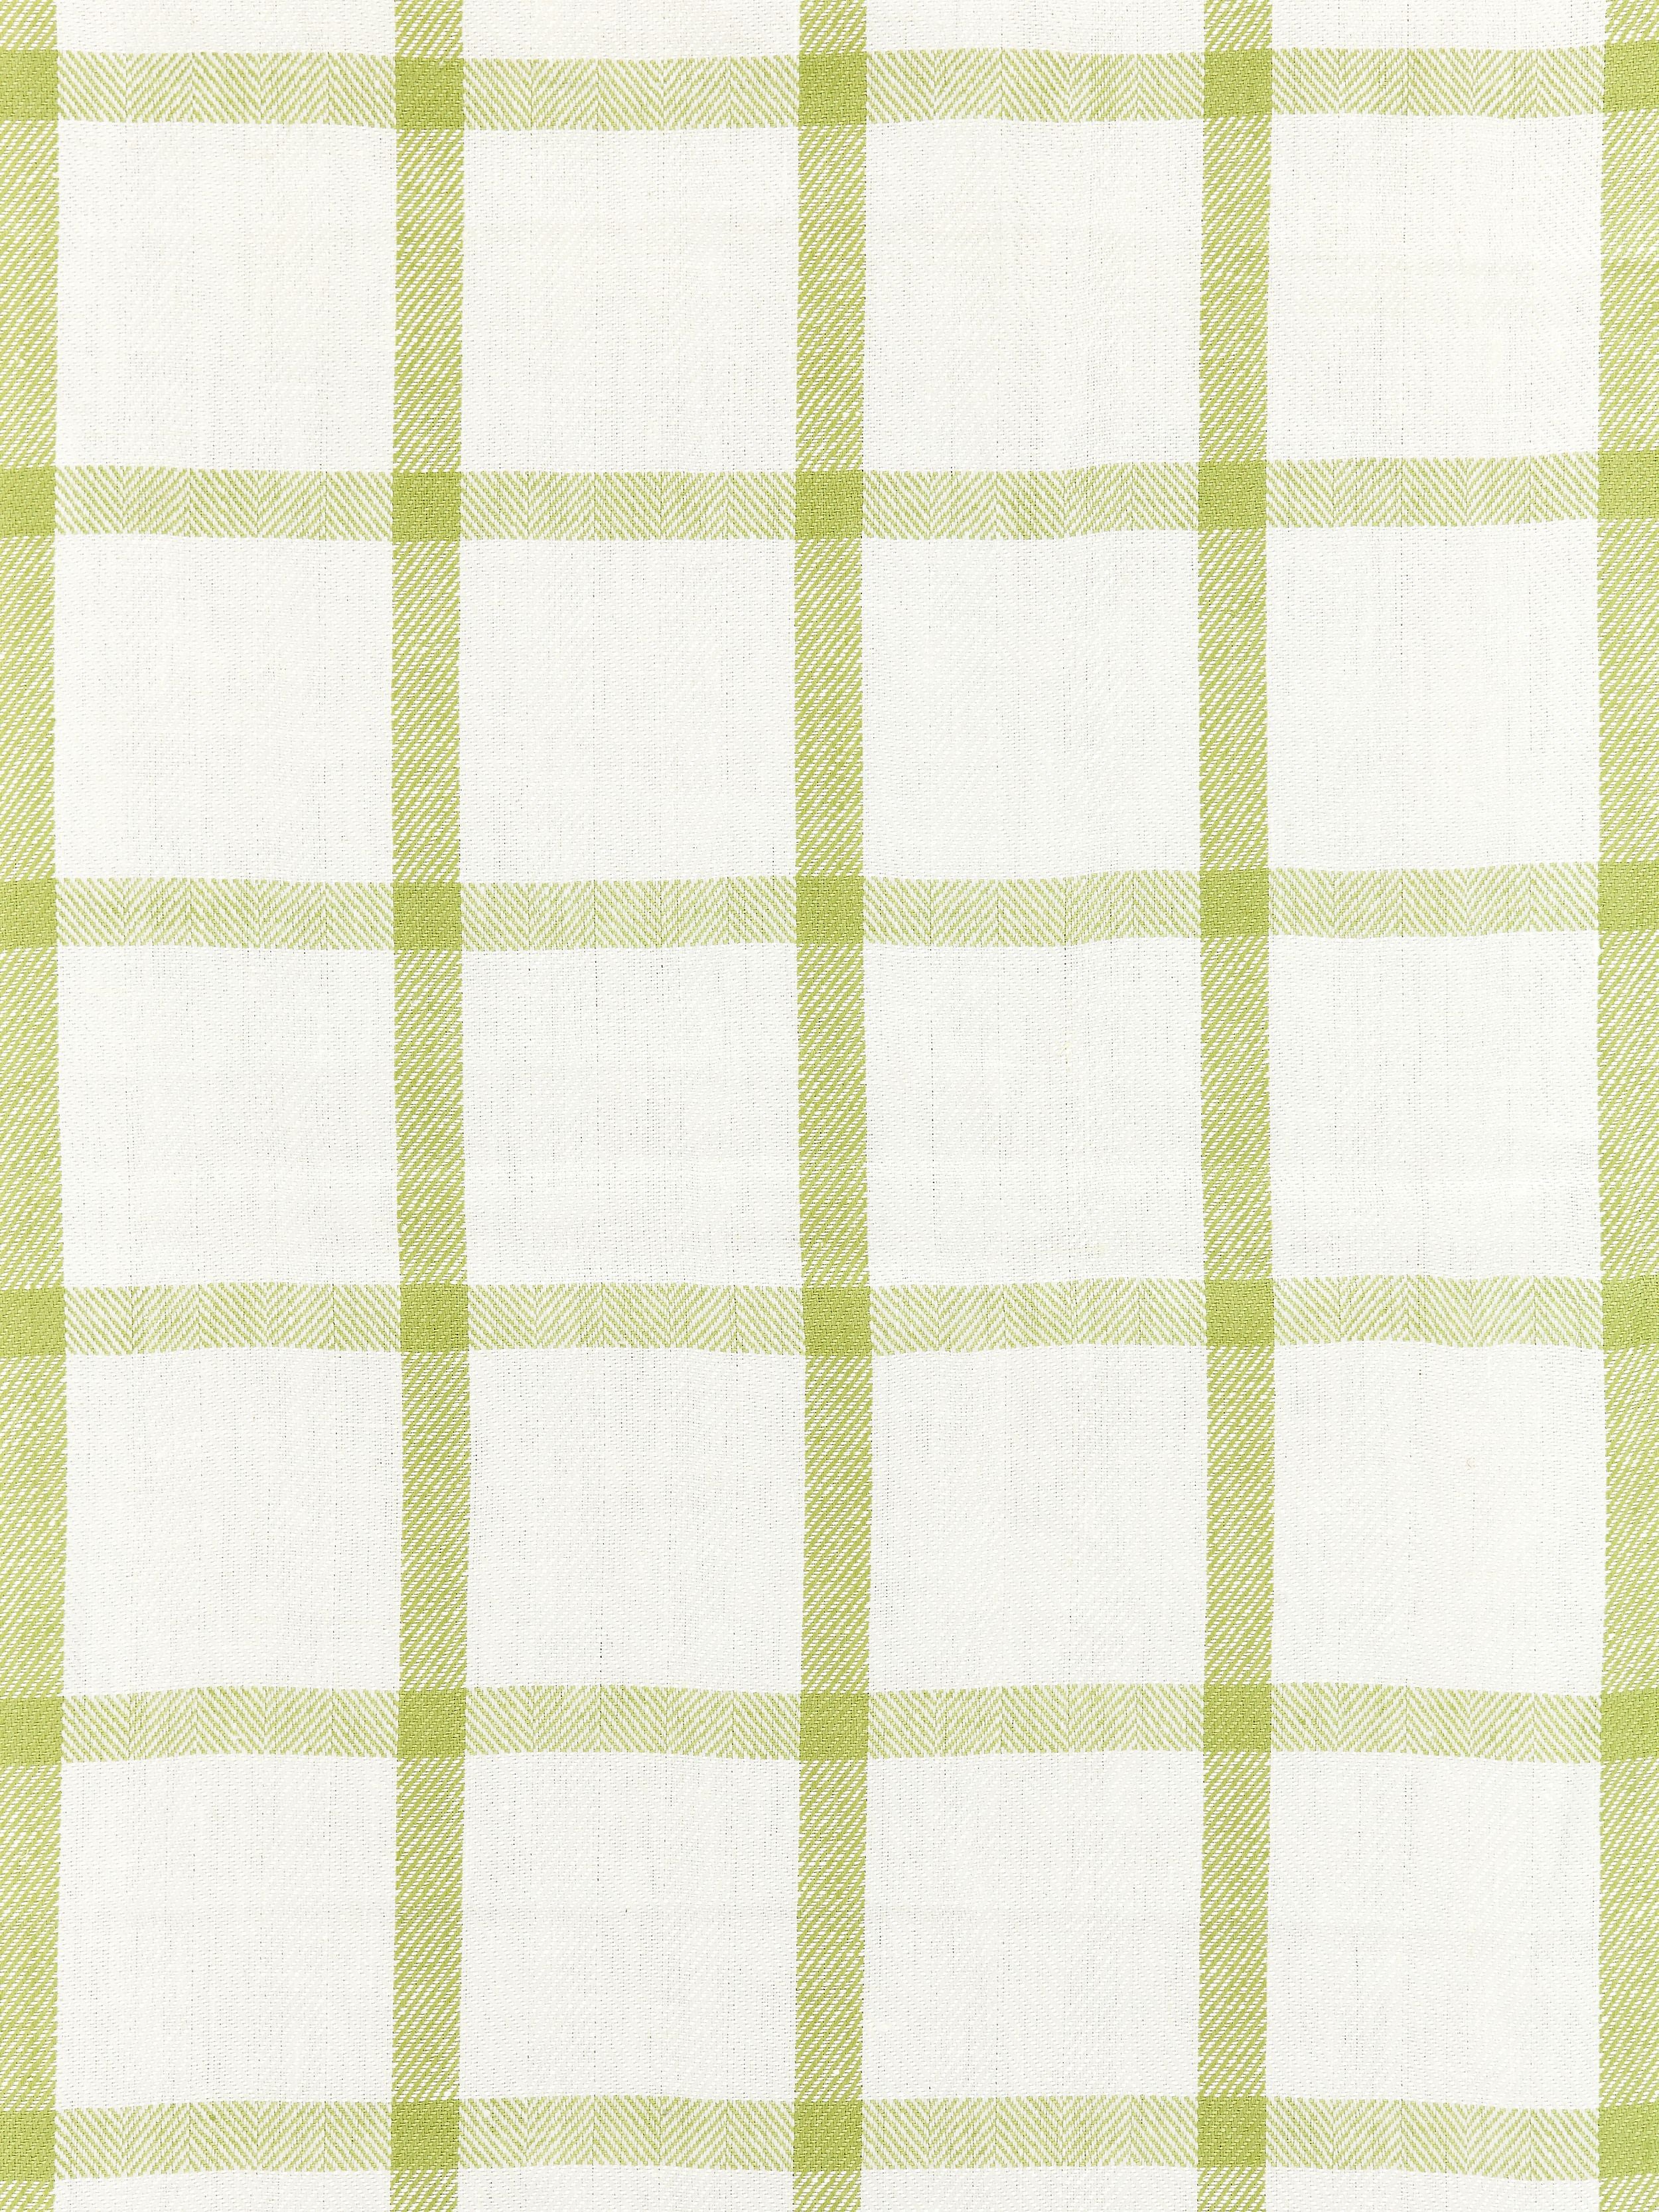 Wilton Linen Check fabric in green tea color - pattern number SC 000227152 - by Scalamandre in the Scalamandre Fabrics Book 1 collection